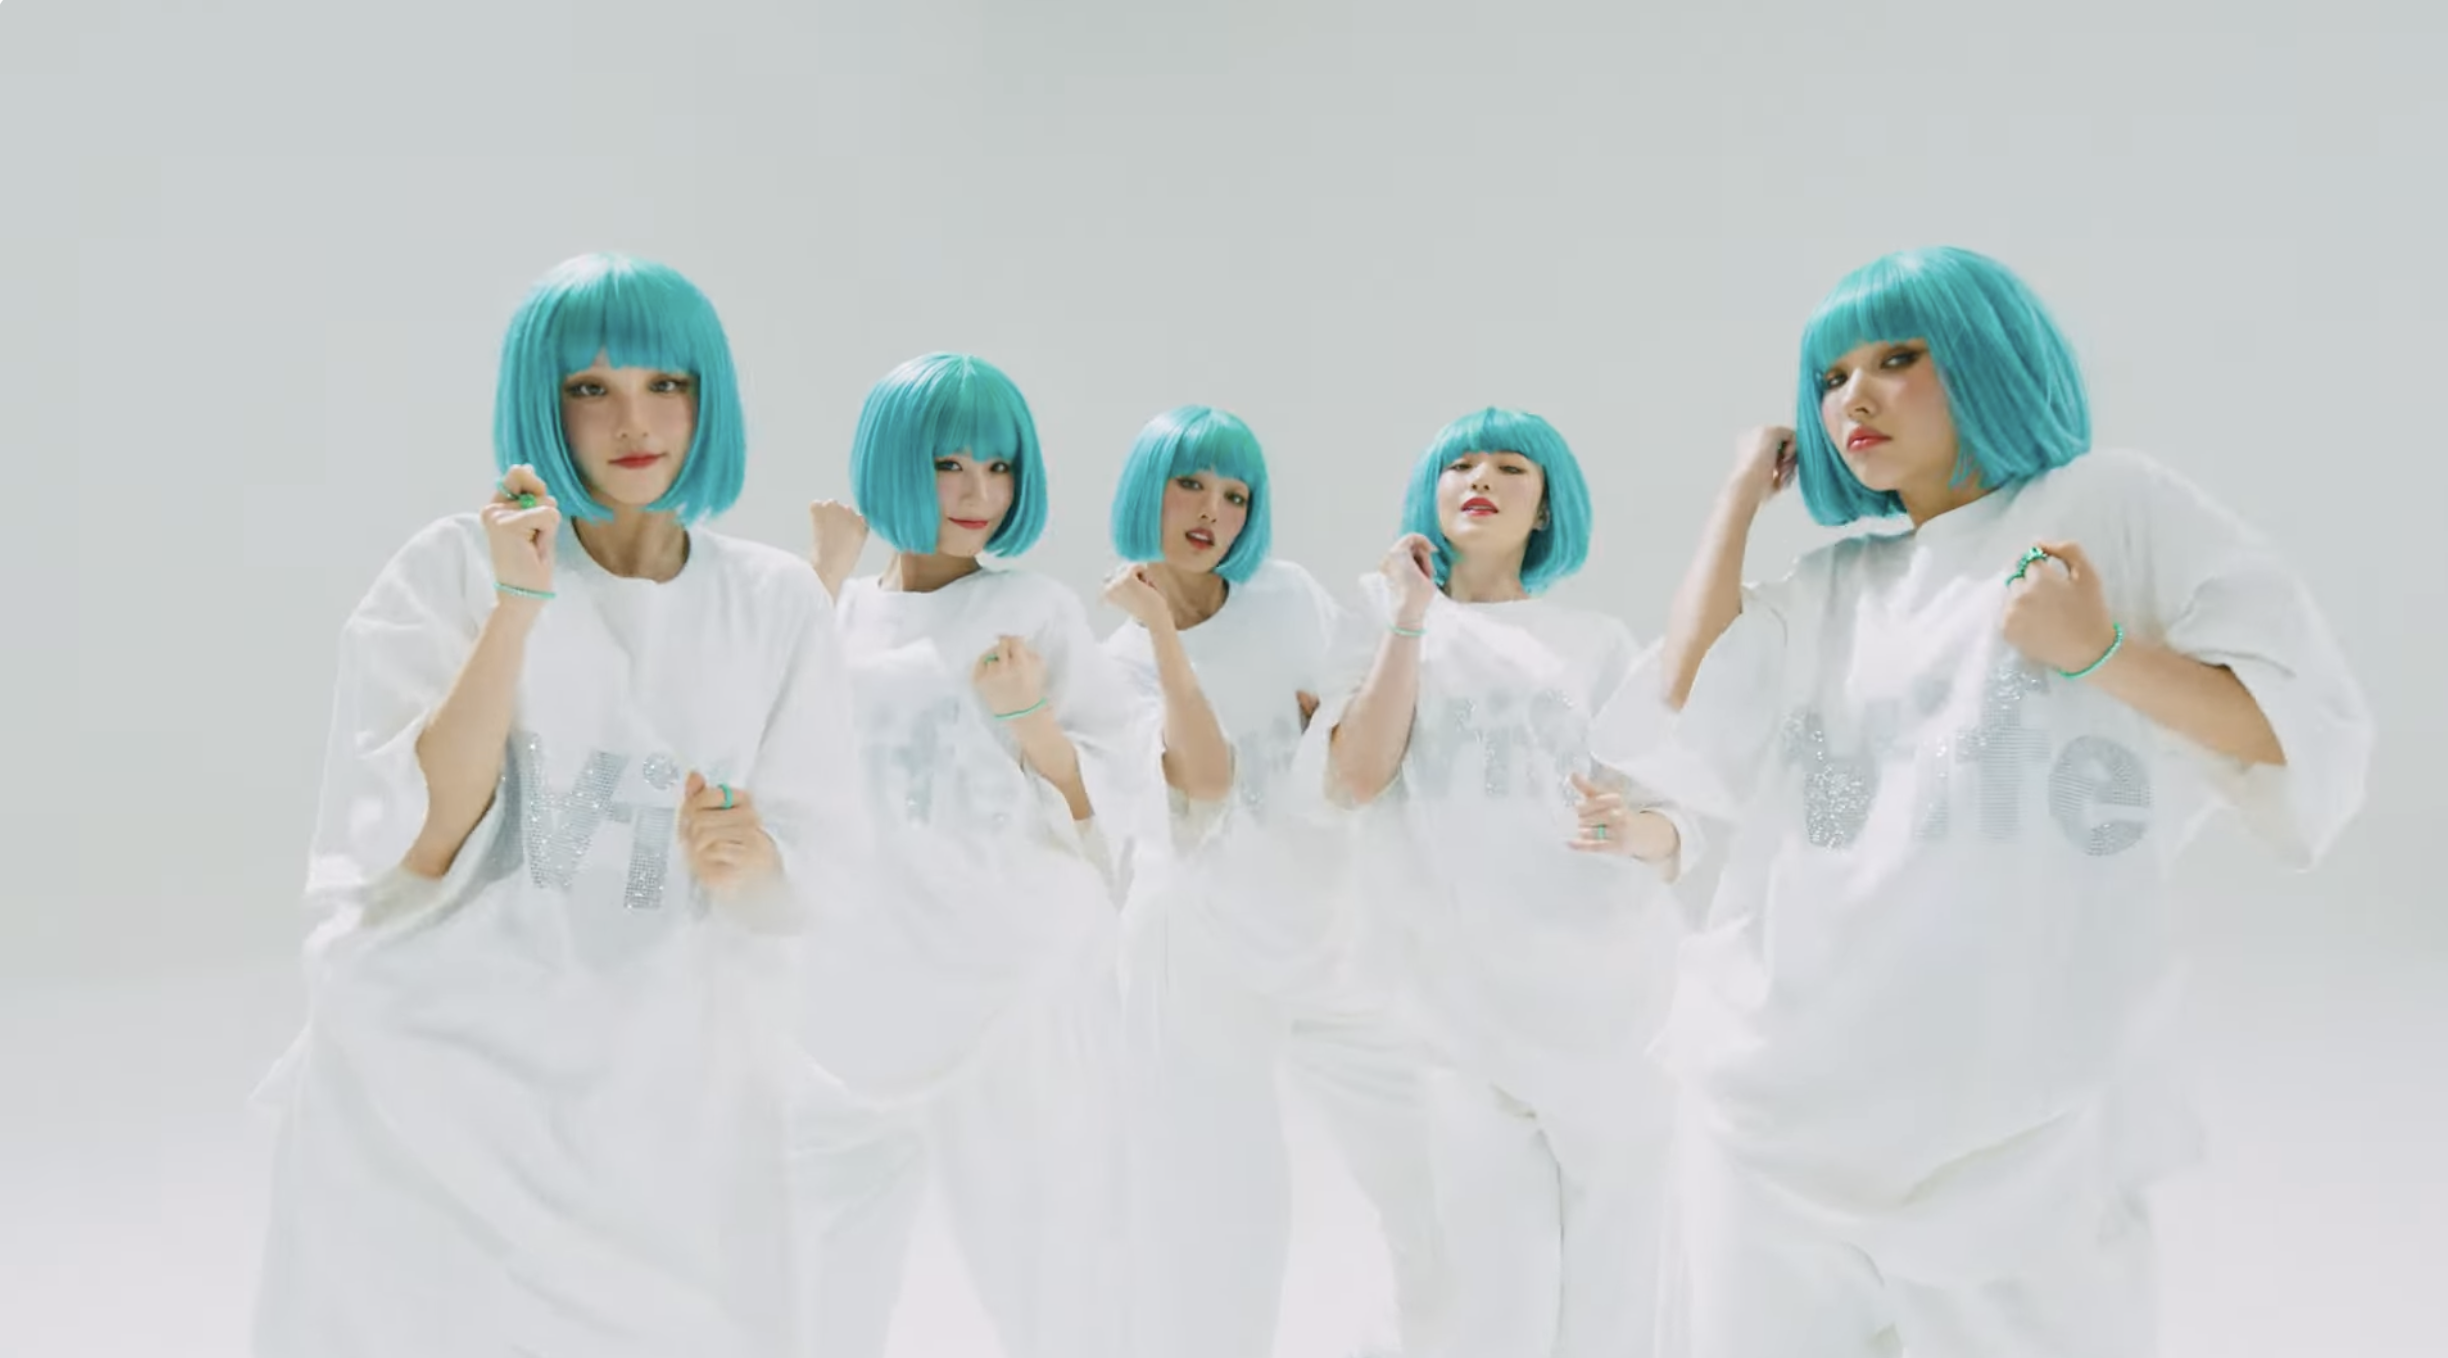 (G)I-DLE music video "Wife" features members in all white outfit with bright turquoise bob wigs.